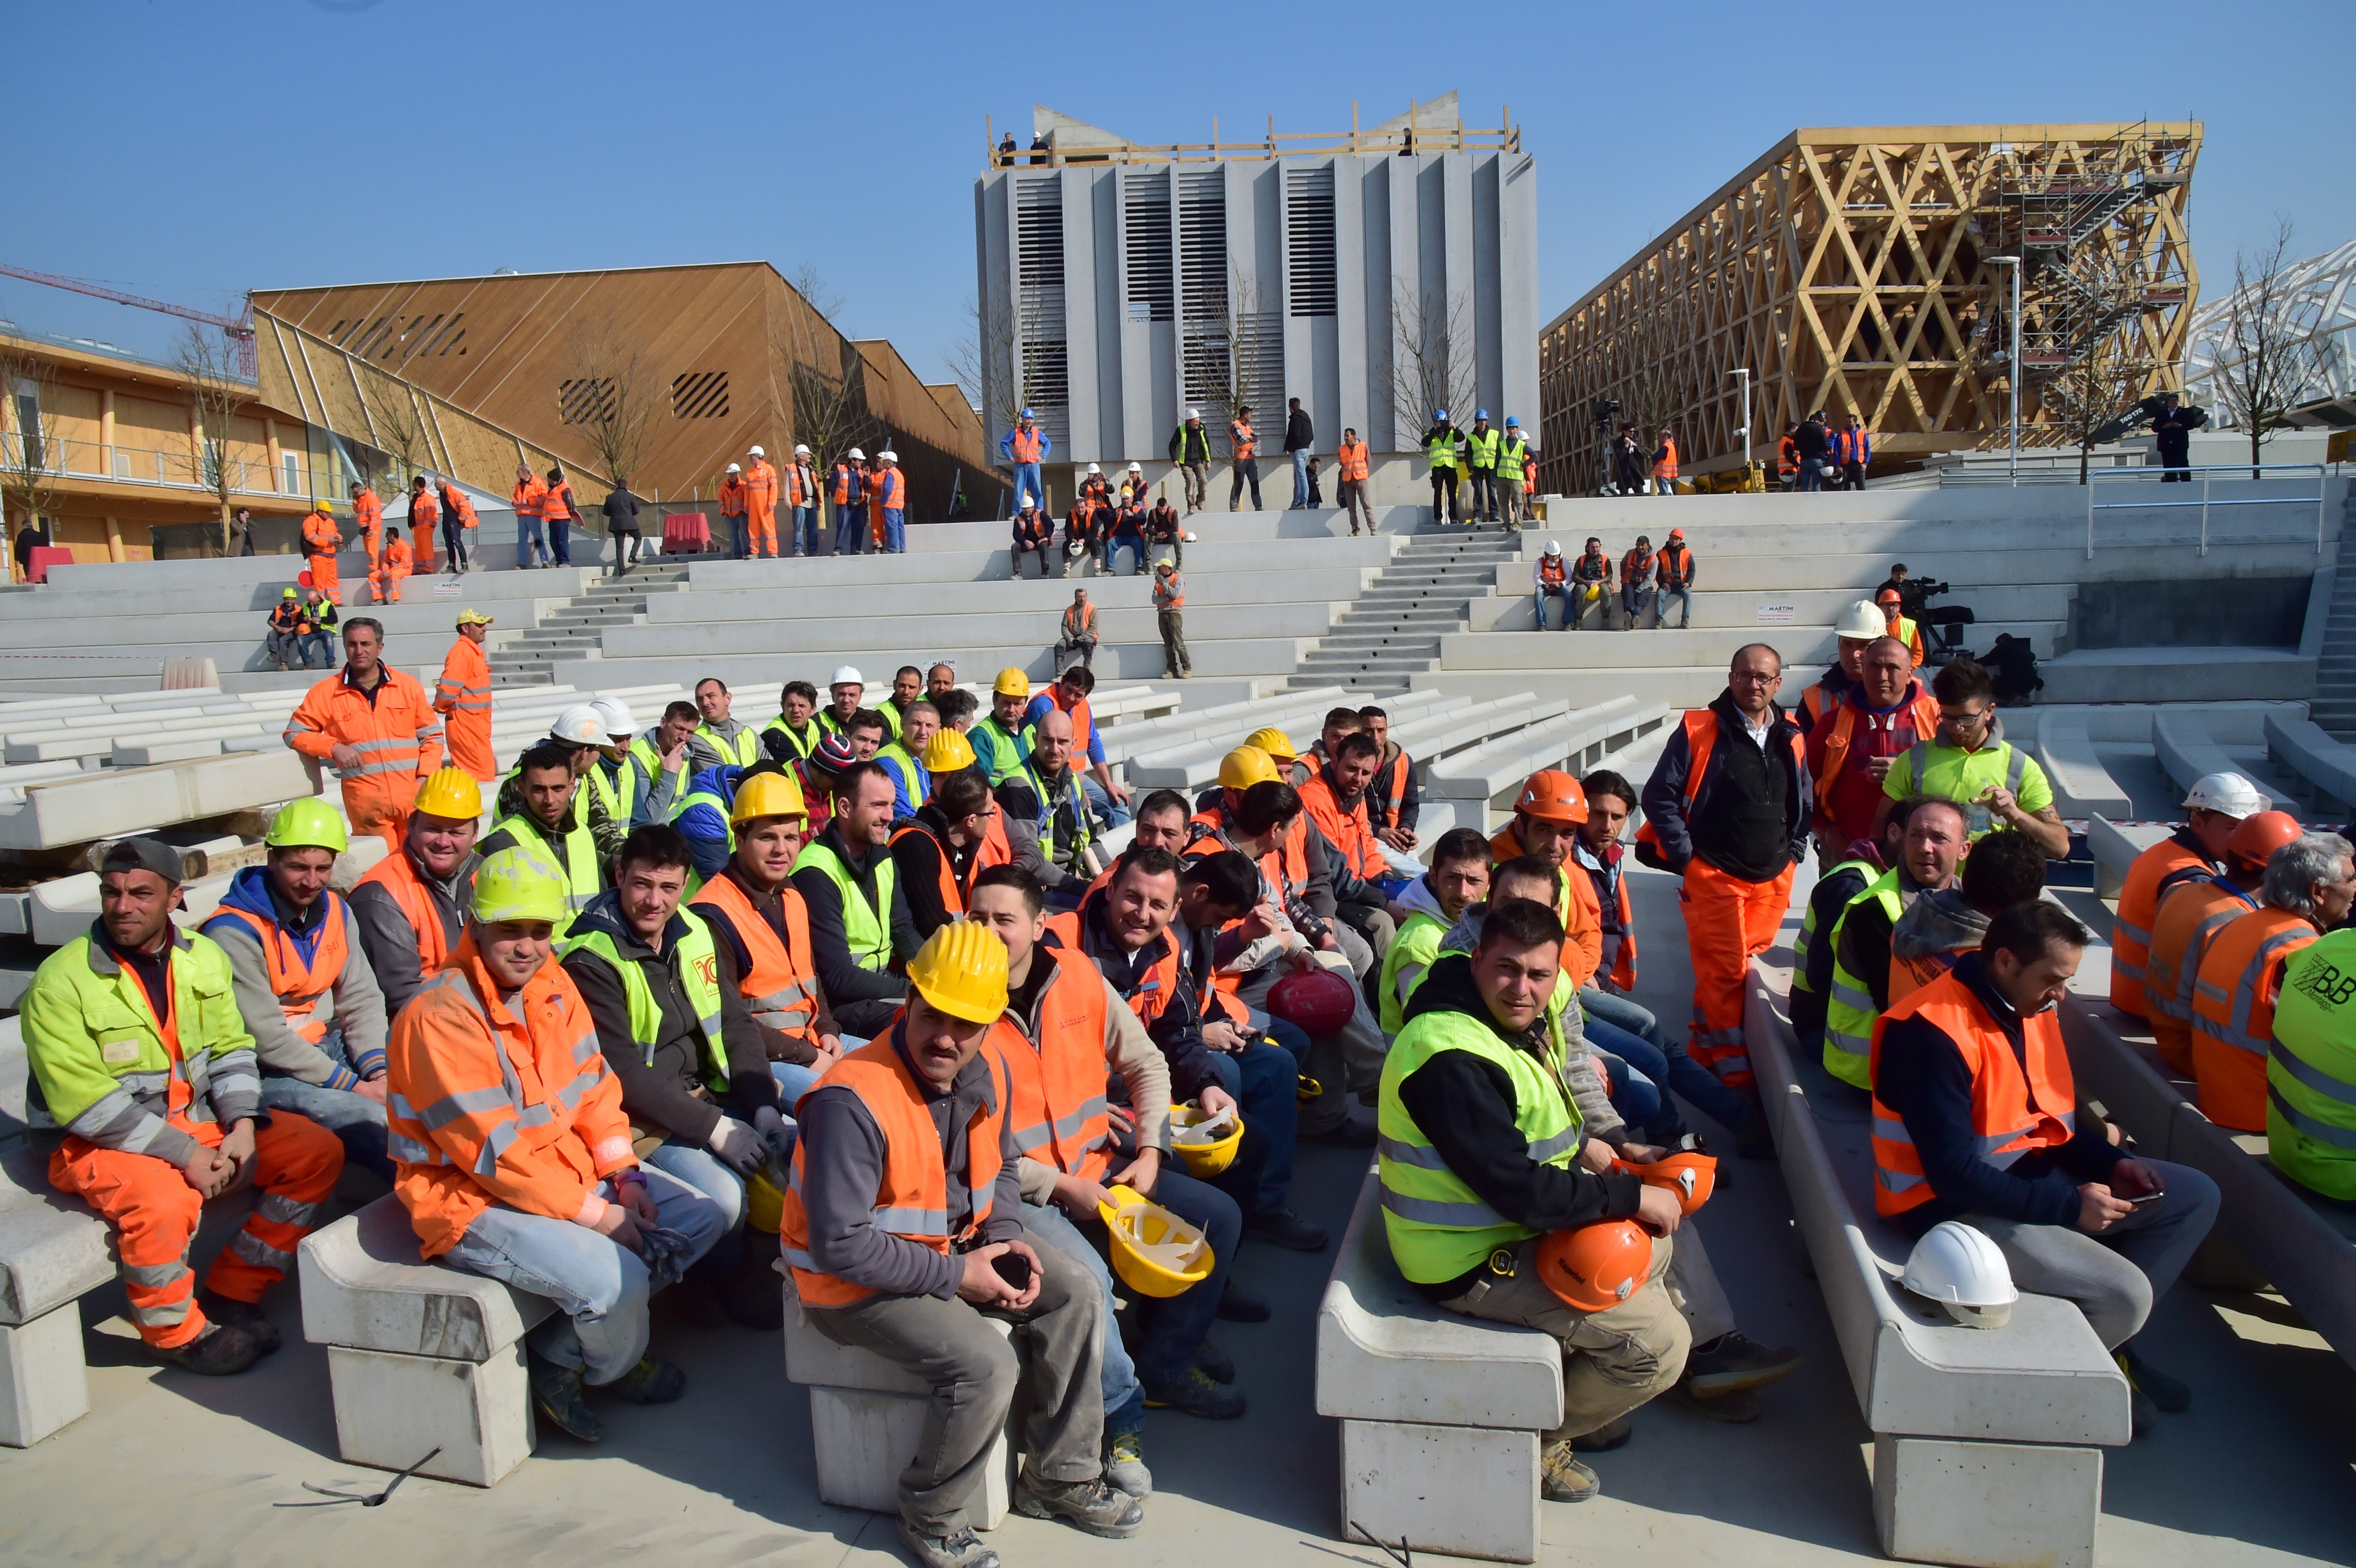 Workers wait for the arrival of Italian Prime Minister Matteo Renzi for a visit at the construction site of the Universal Exhibition 2015 (Expo Milano 2015 or World Exposition 2015) in Milan on March 13, 2015. The exhibition will run from May 1st, 2015 to October 31, 2015 on the theme Feeding the Planet, Energy for Life. The fair focuses on food security, sustainable agricultural practices, nutrition and battling hunger - as well as on dishing out the best fare of the world's culinary cultures.  Photo: GIUSEPPE CACACE/AFP/Getty Images.